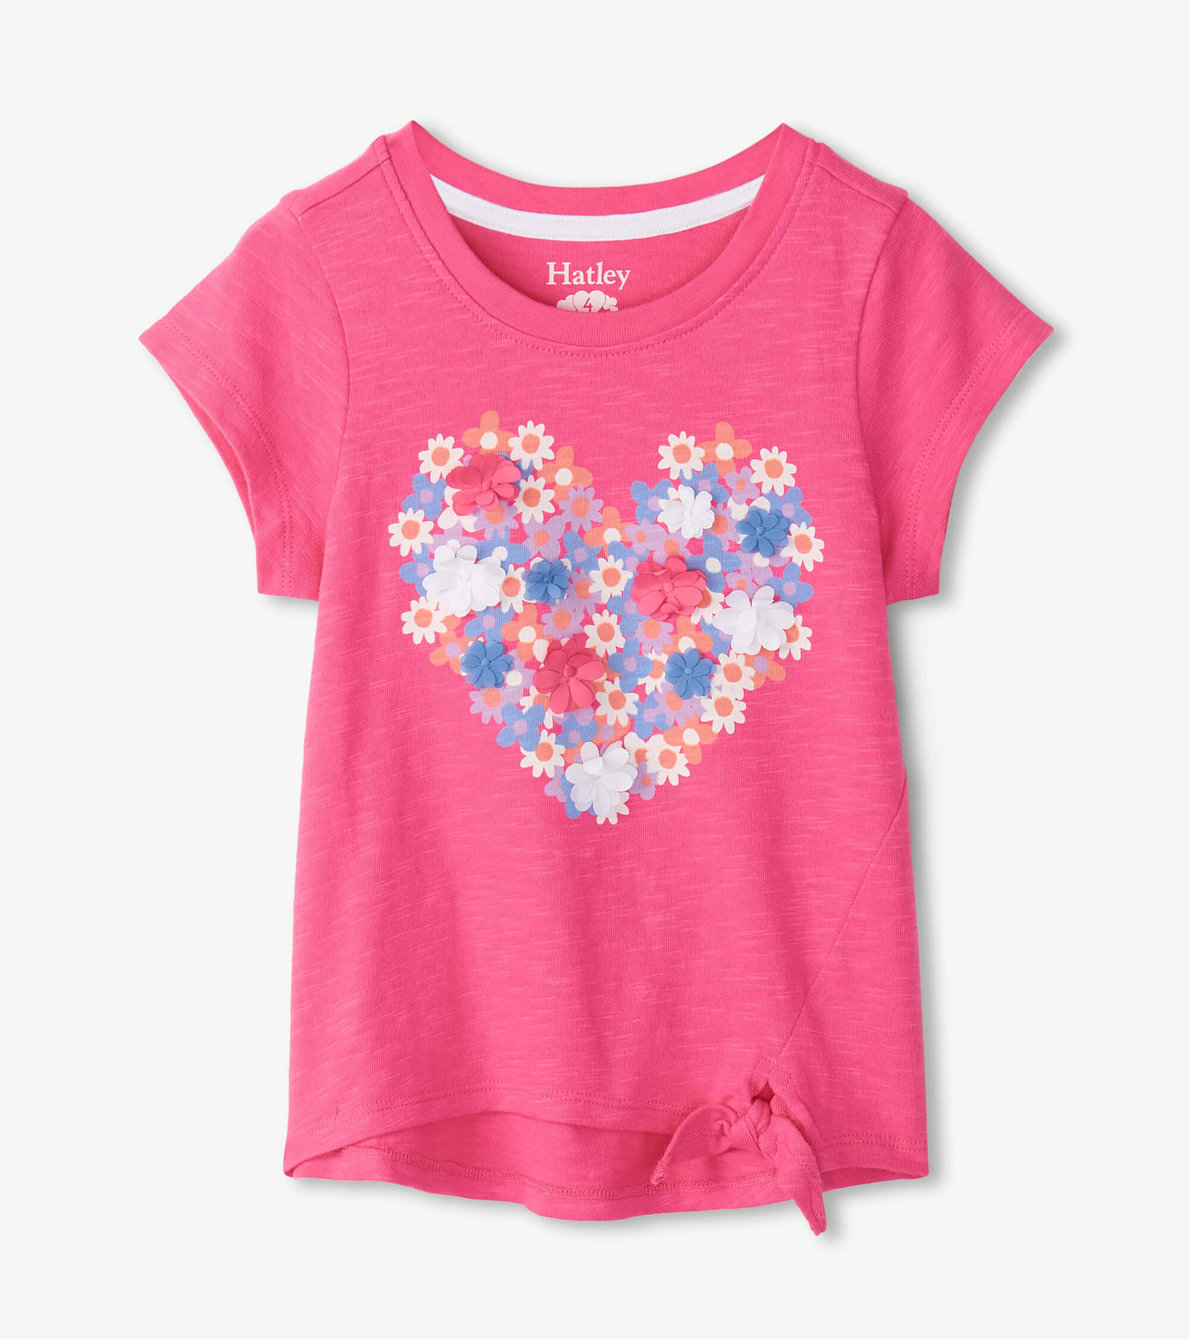 View larger image of Girls Chiffon Heart Tie Front T-Shirt